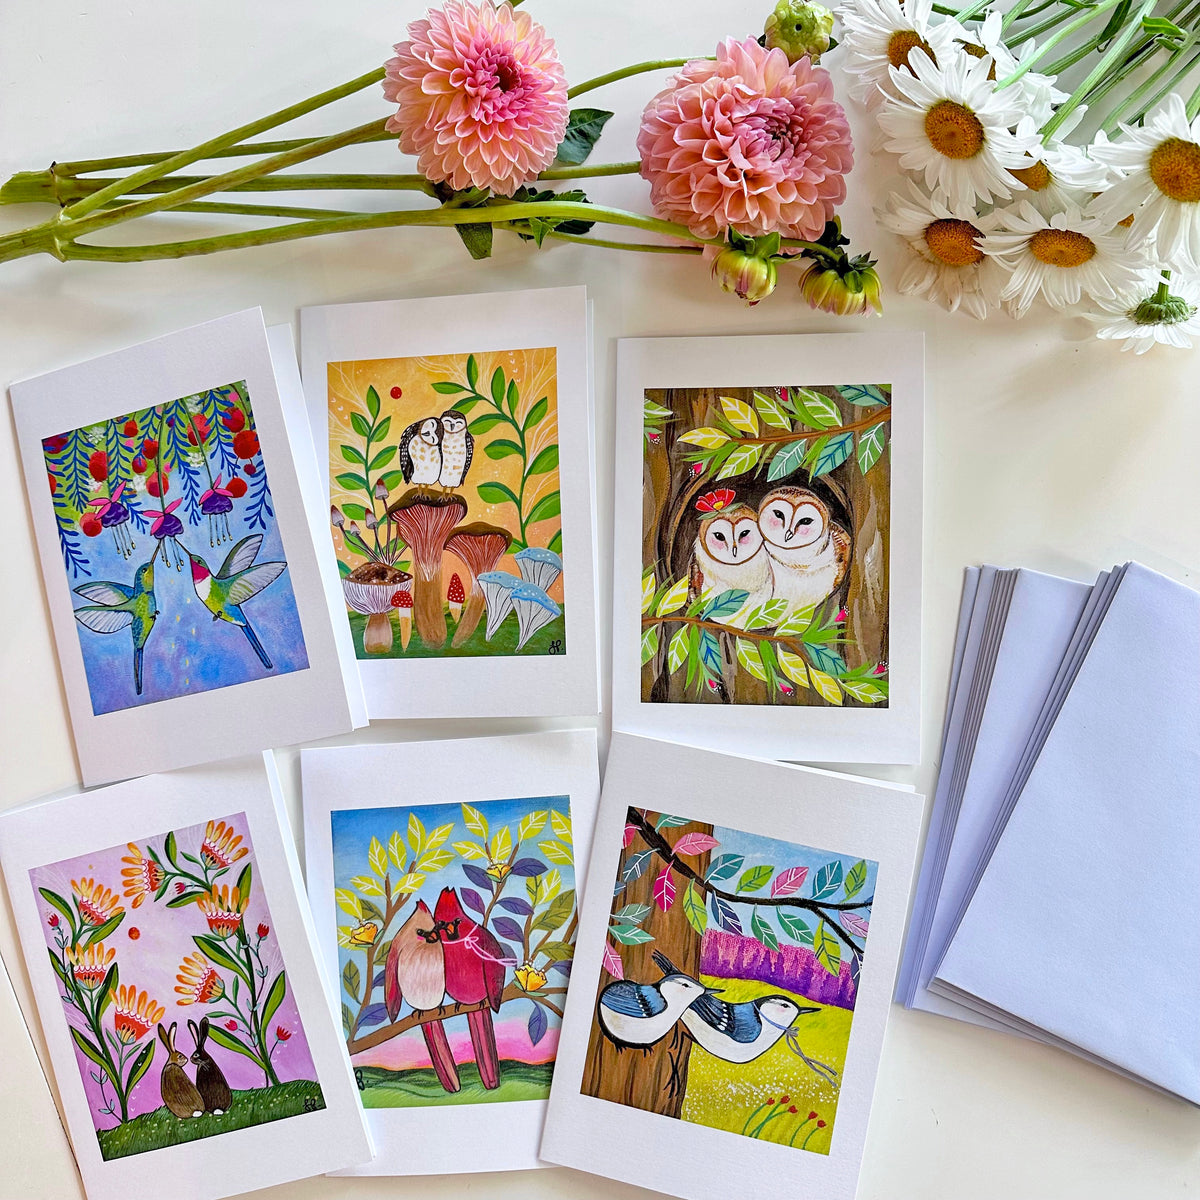 Paper Card & Canvas, Stationery, Art & Craft